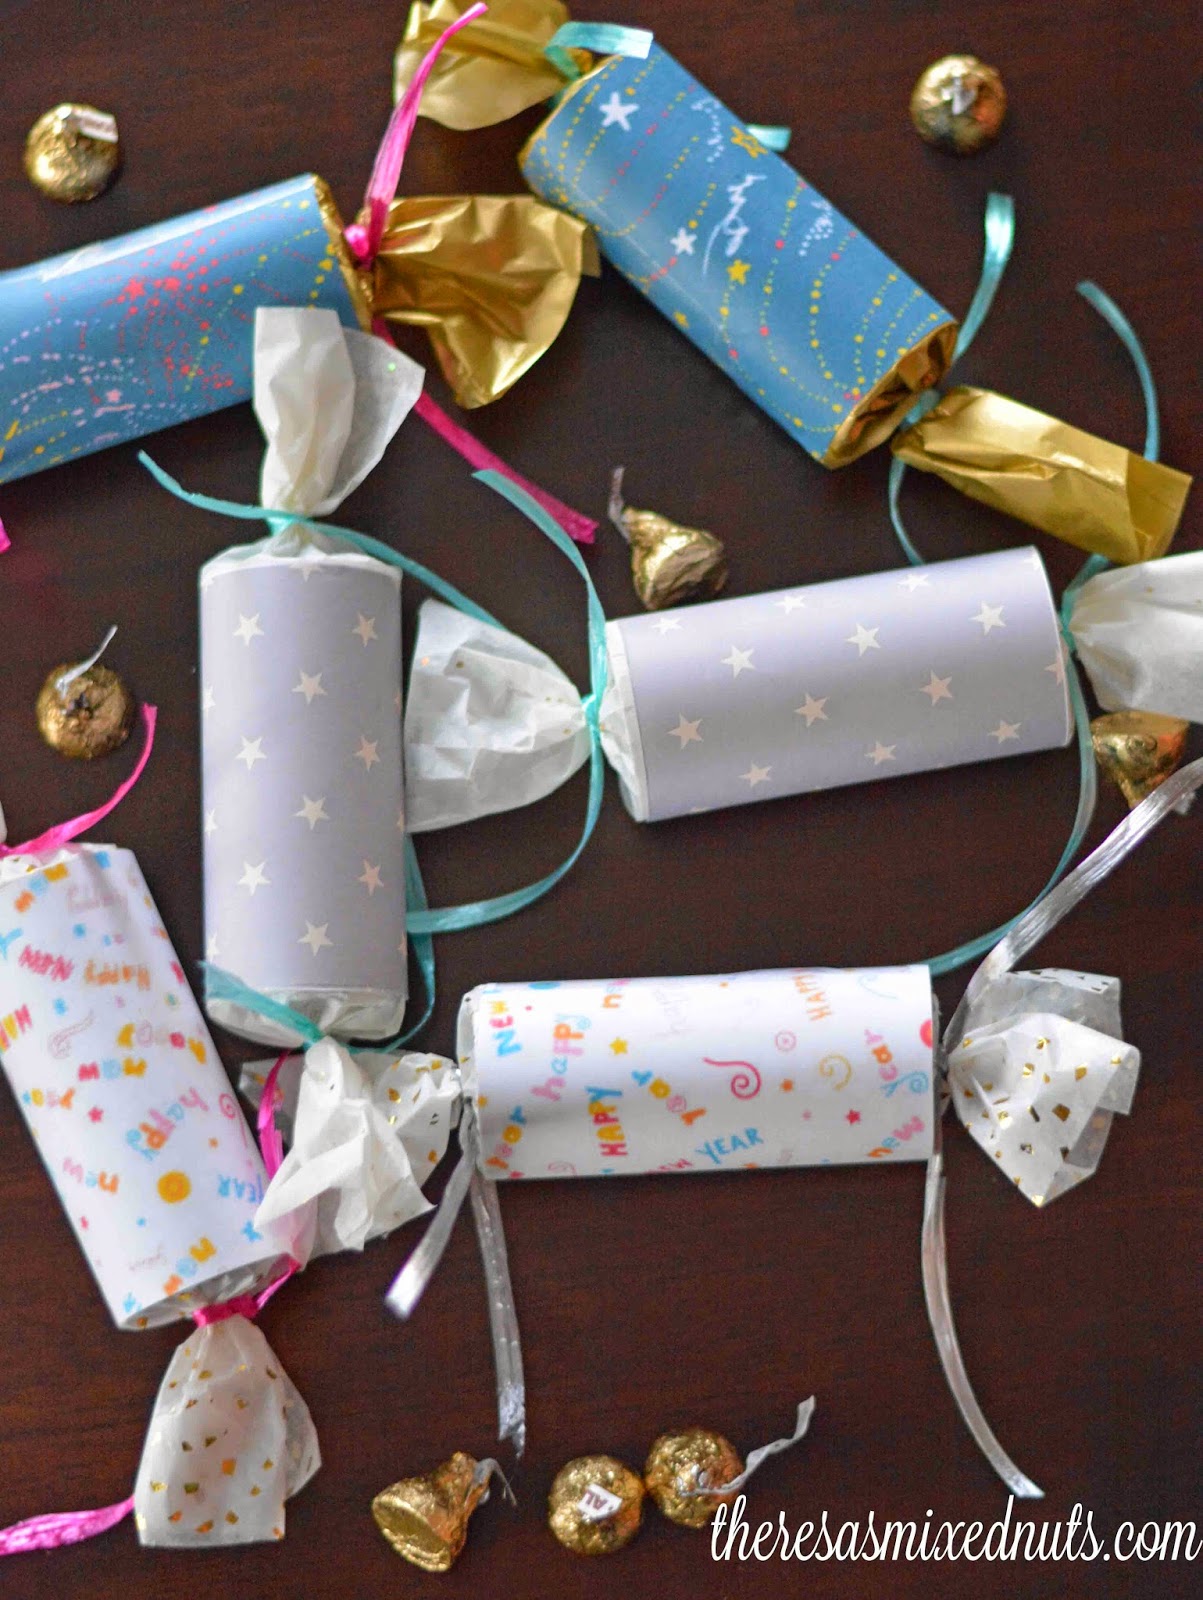 How To Use Paper Bags As Wrapping Paper - The DIY Nuts